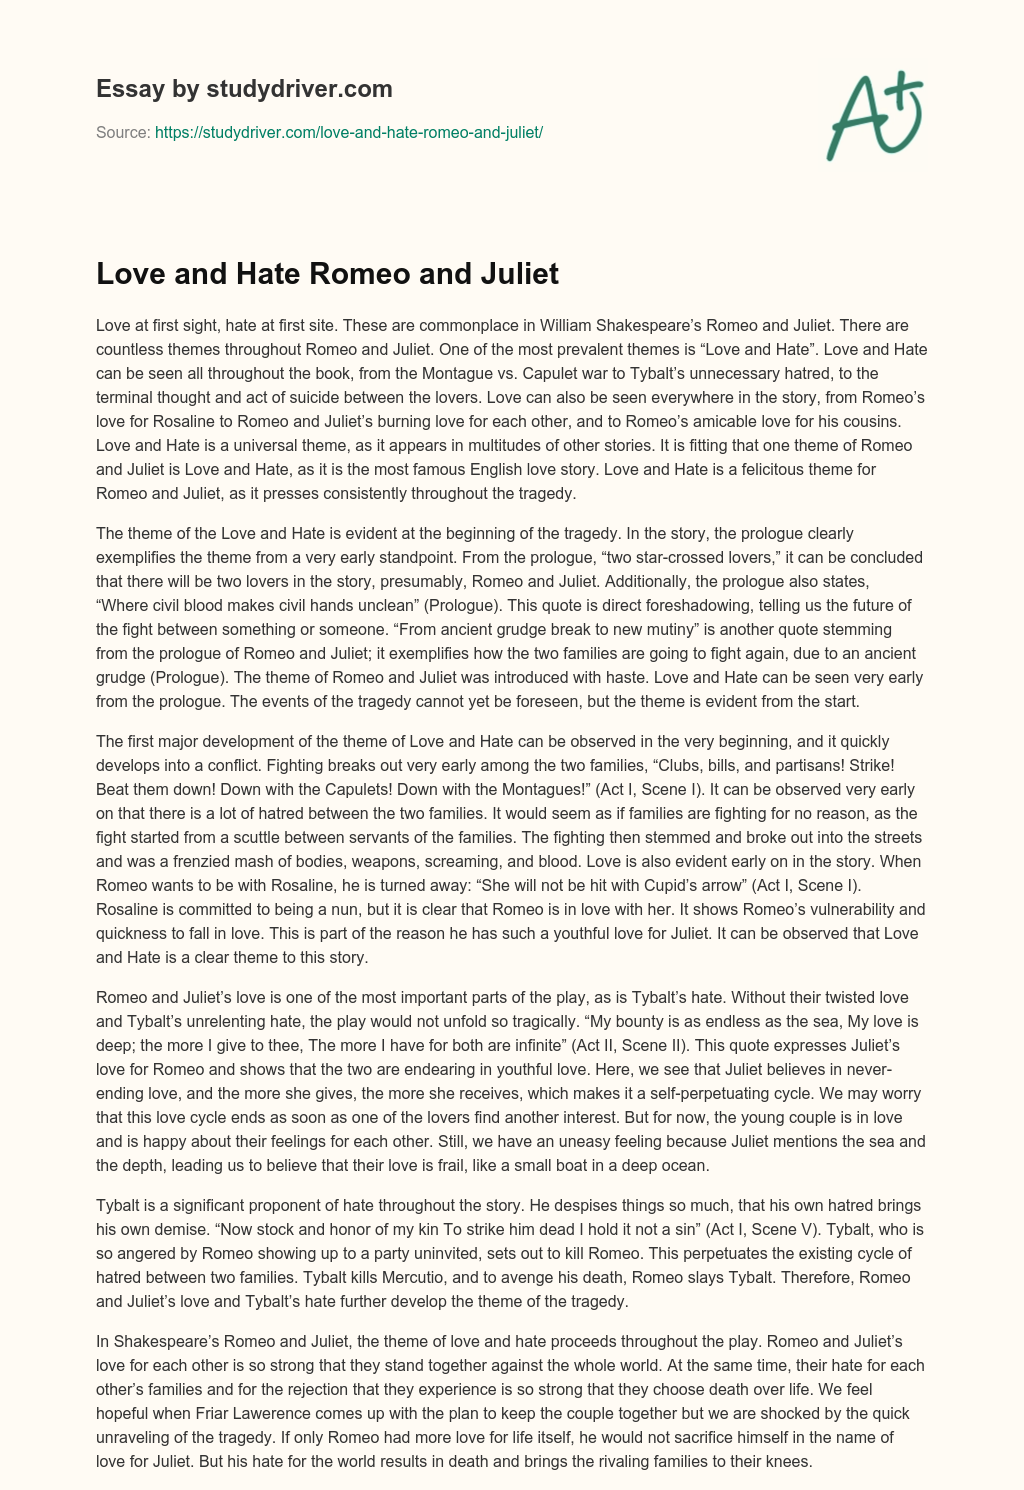 Love and Hate Romeo and Juliet essay